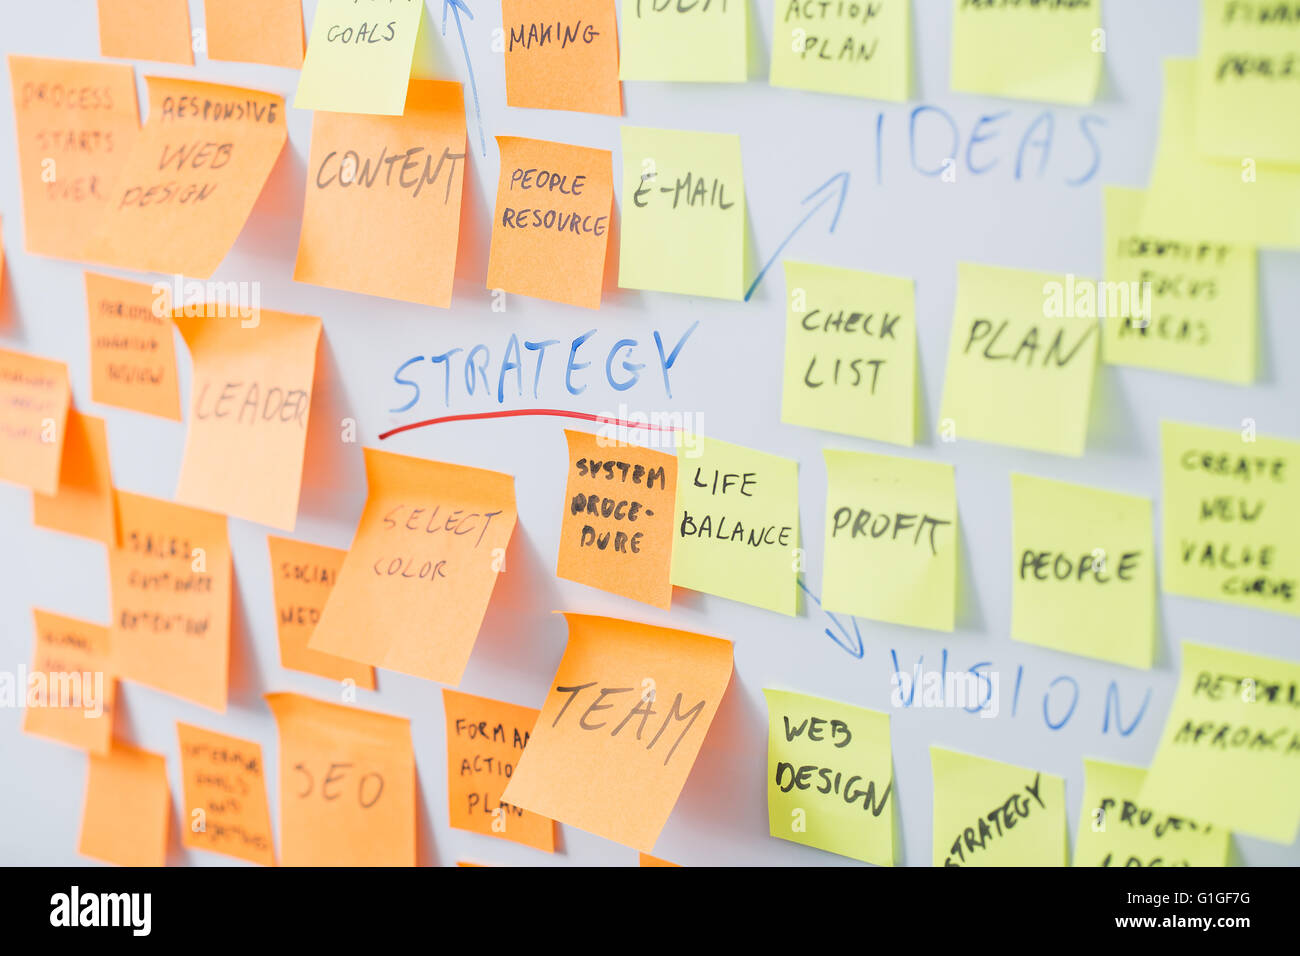 brainstorming brainstorm strategy workshop business note notes sticky - stock image Stock Photo